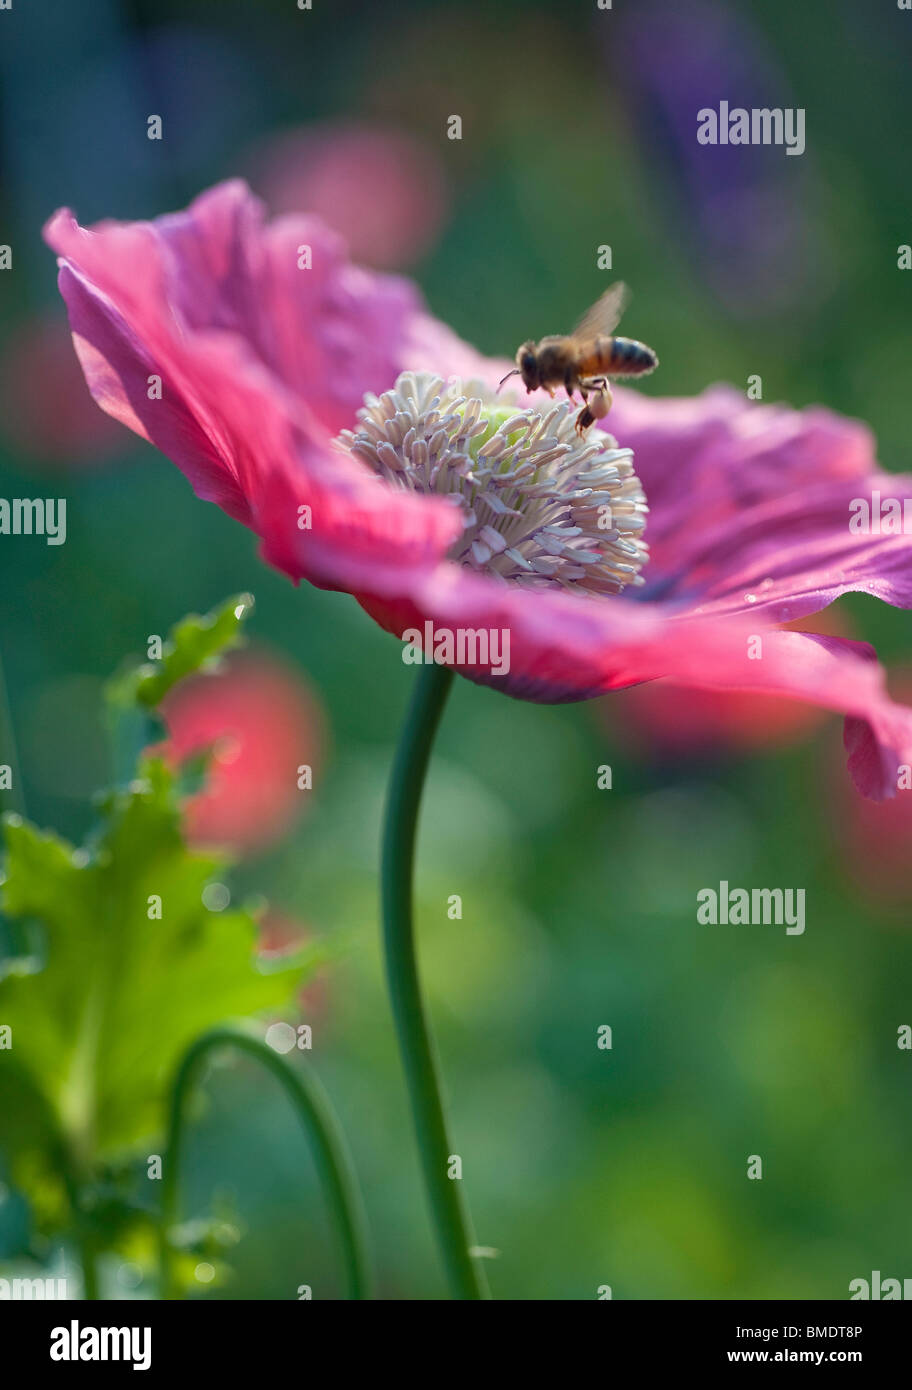 A bee flies through the morning light to land on a pink poppy in a garden. Stock Photo